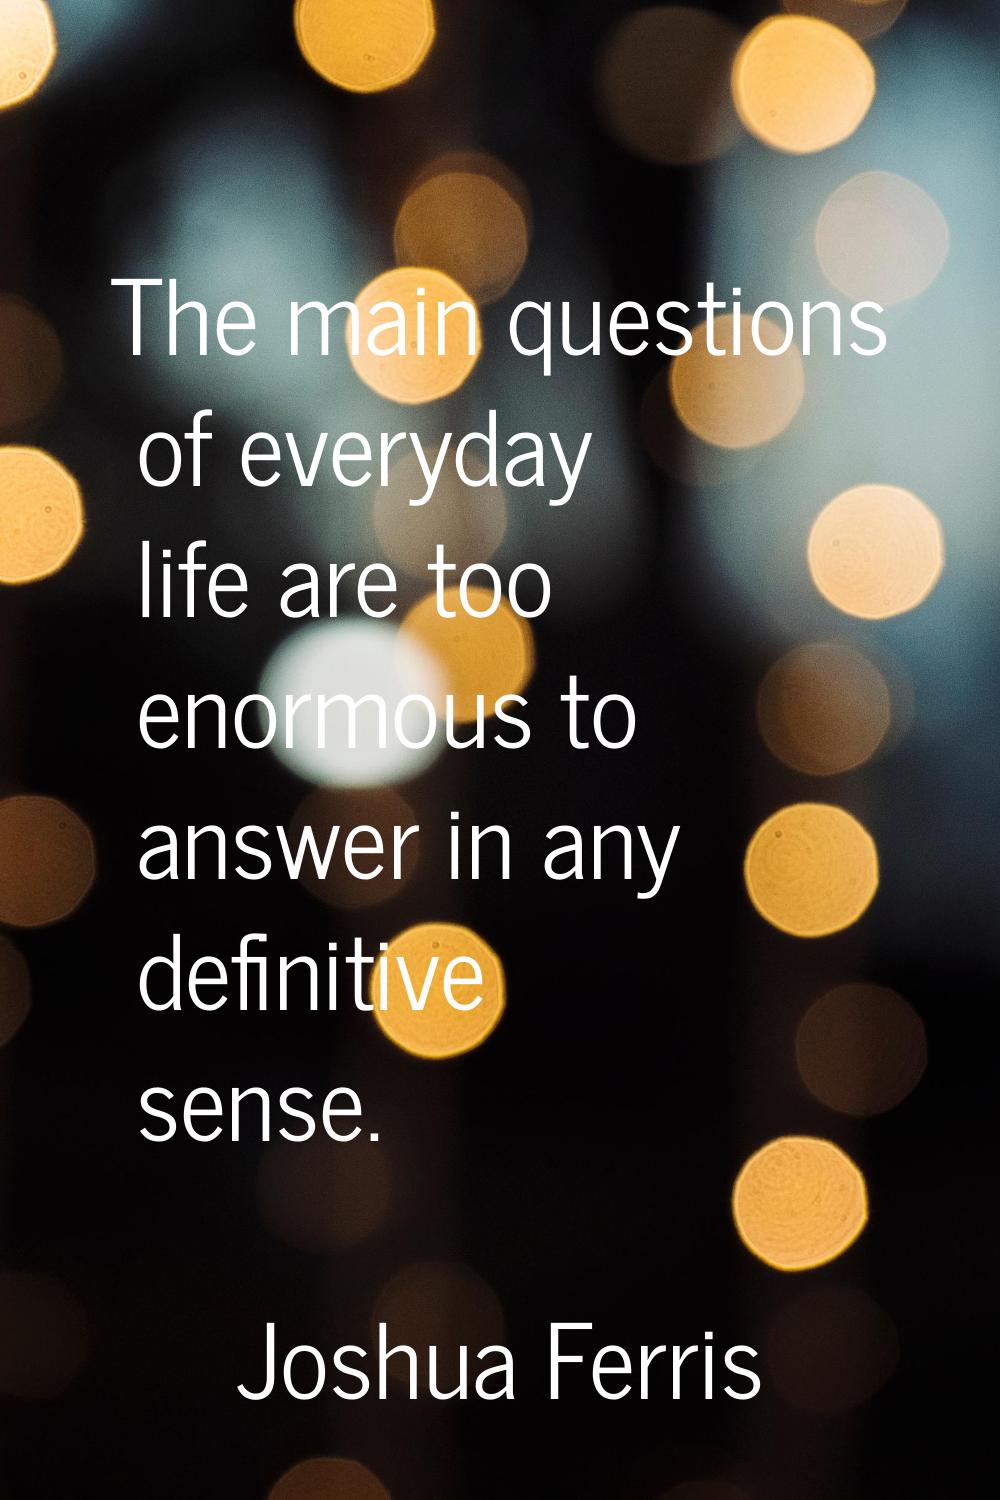 The main questions of everyday life are too enormous to answer in any definitive sense.